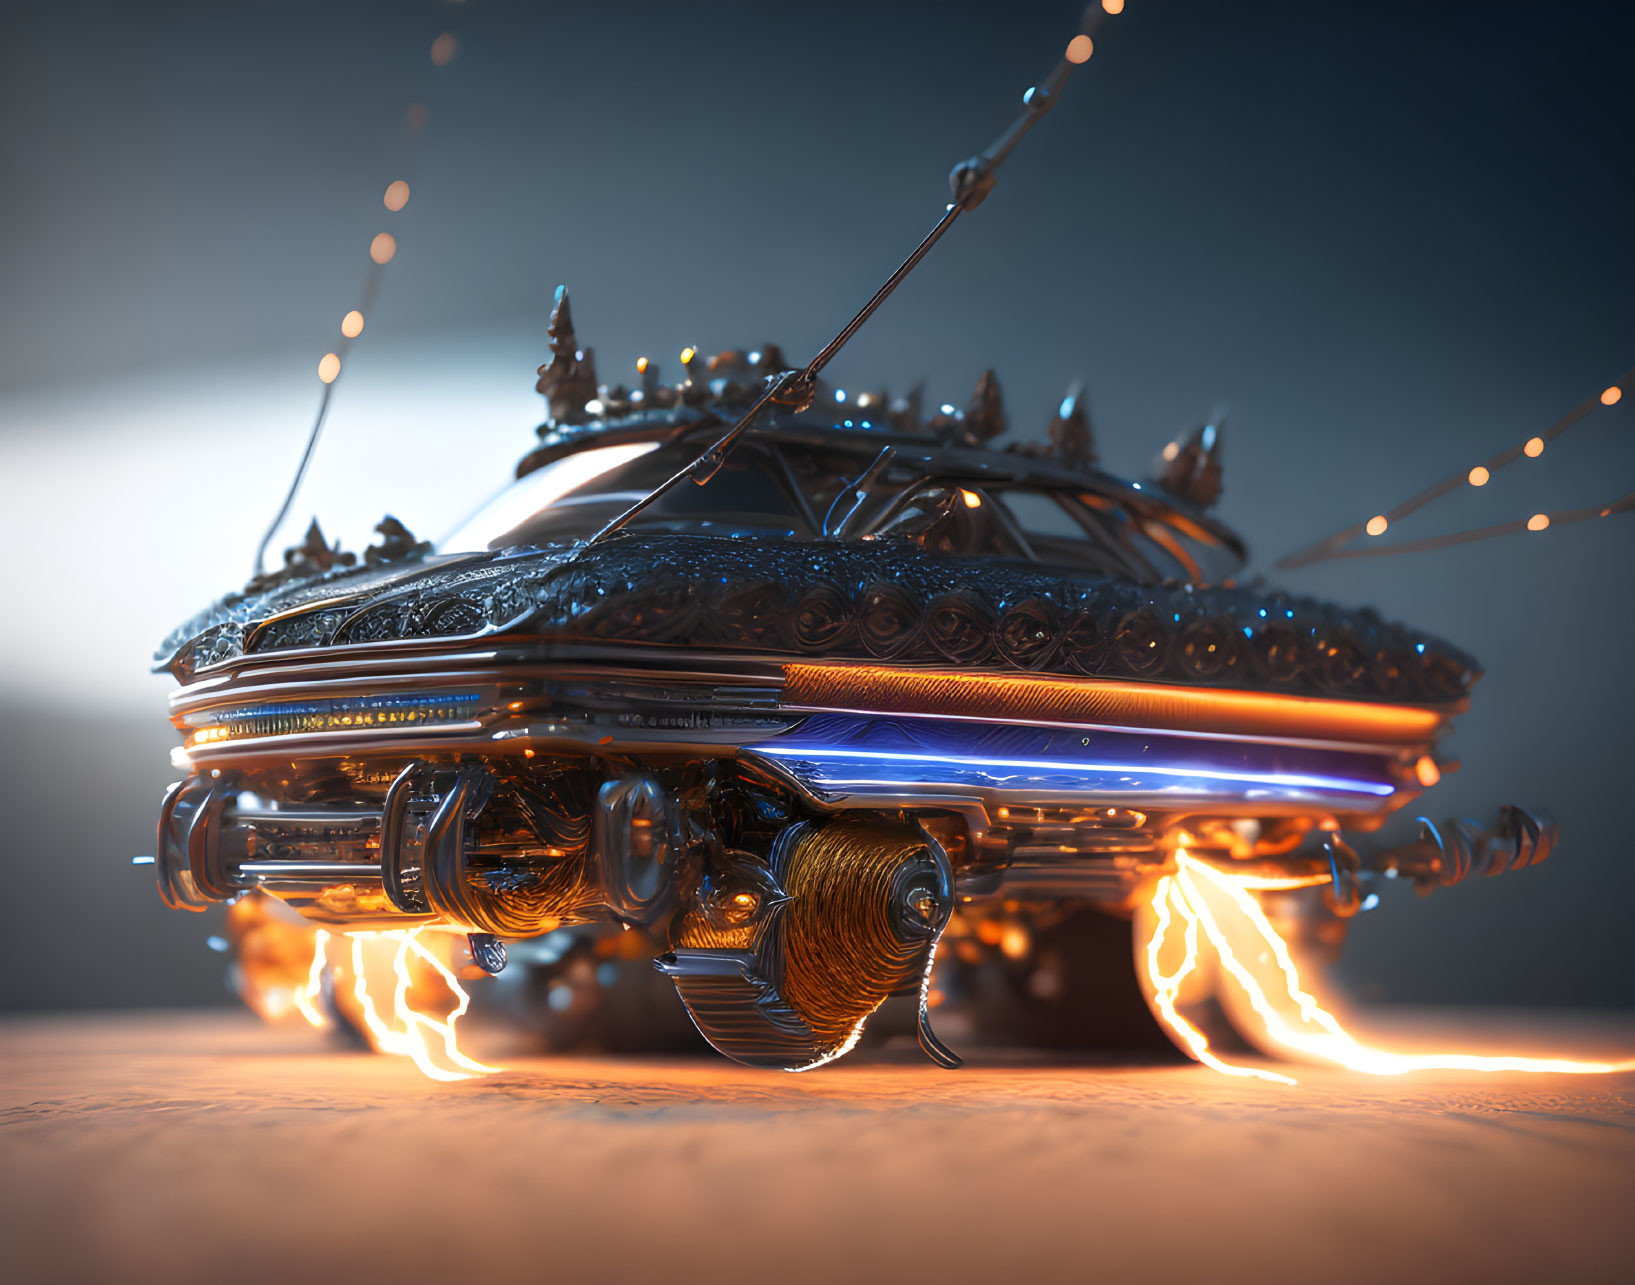 Detailed futuristic vehicle with intricate designs and neon blue lighting hovering above ground